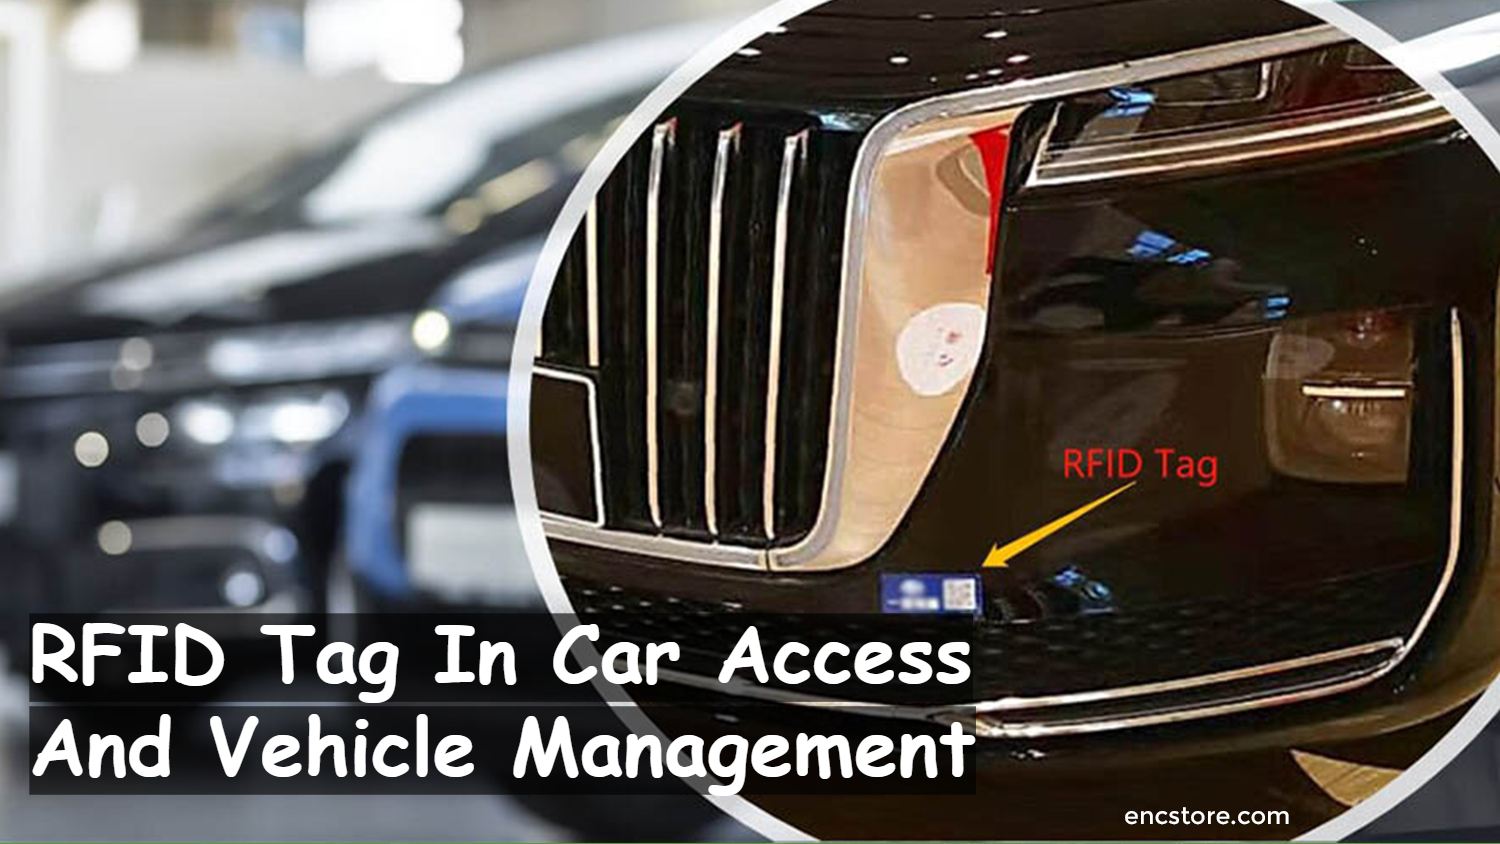 RFID Tag In Car Access And Vehicle Management